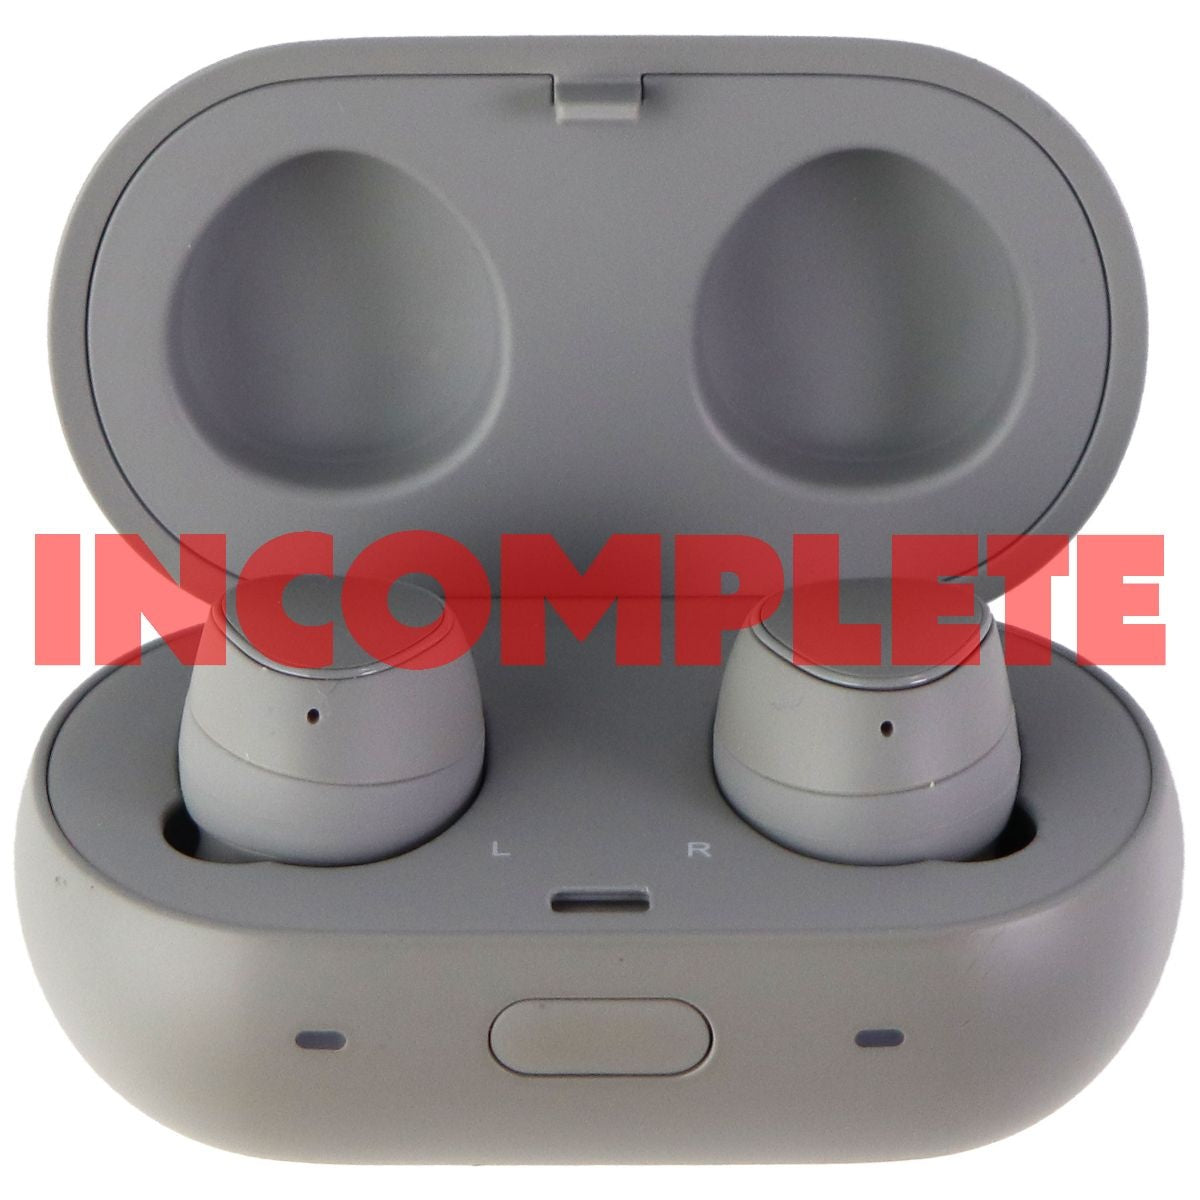 Samsung Gear IconX (2018 Edition) Bluetooth Cord-free Fitness Earbuds - Gray Portable Audio - Headphones Samsung Electronics    - Simple Cell Bulk Wholesale Pricing - USA Seller